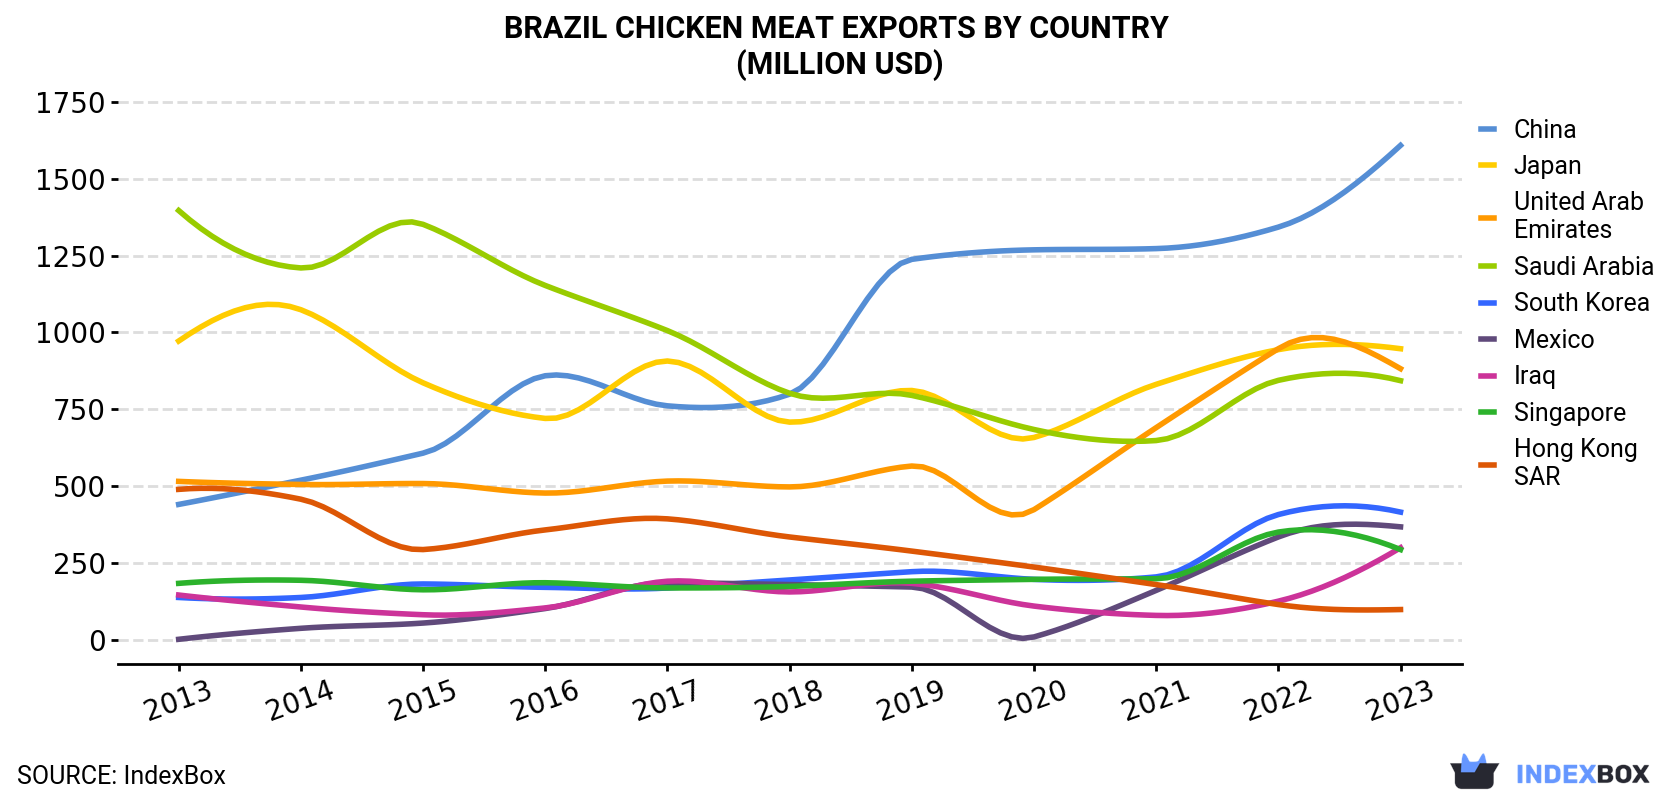 Brazil Chicken Meat Exports By Country (Million USD)